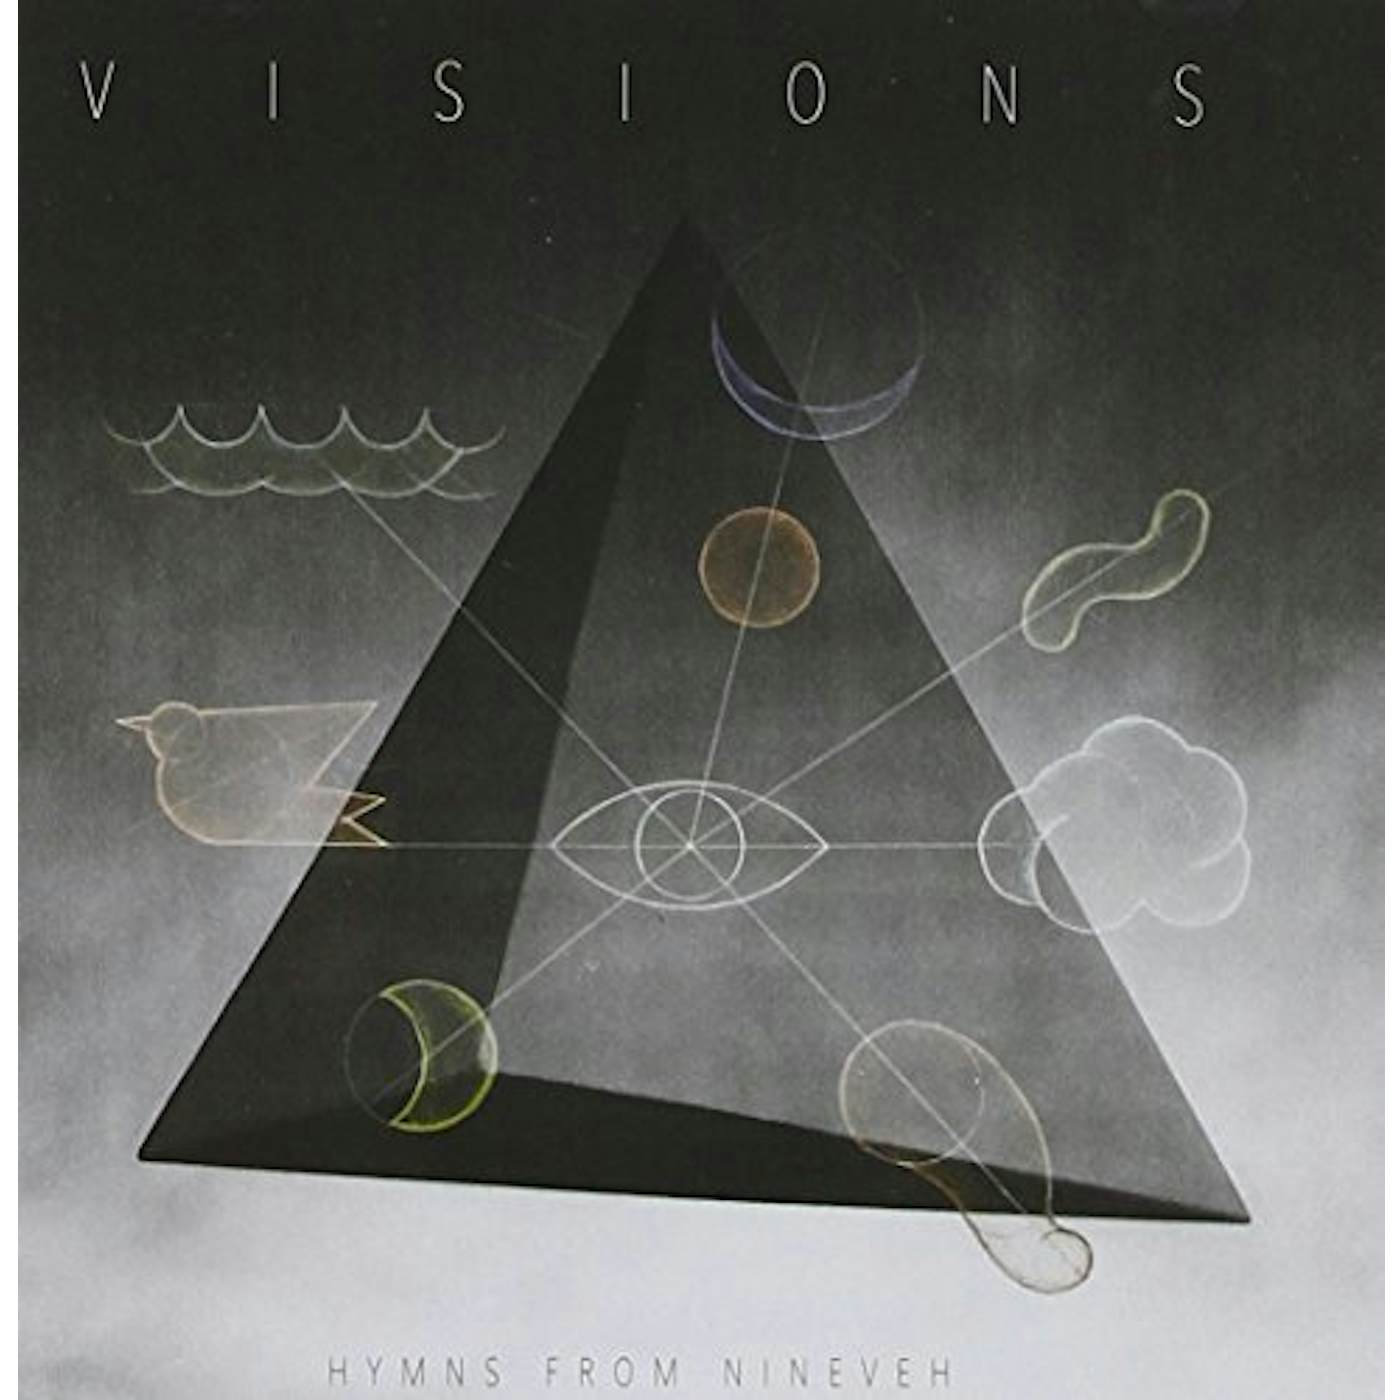 Hymns from Nineveh VISIONS CD